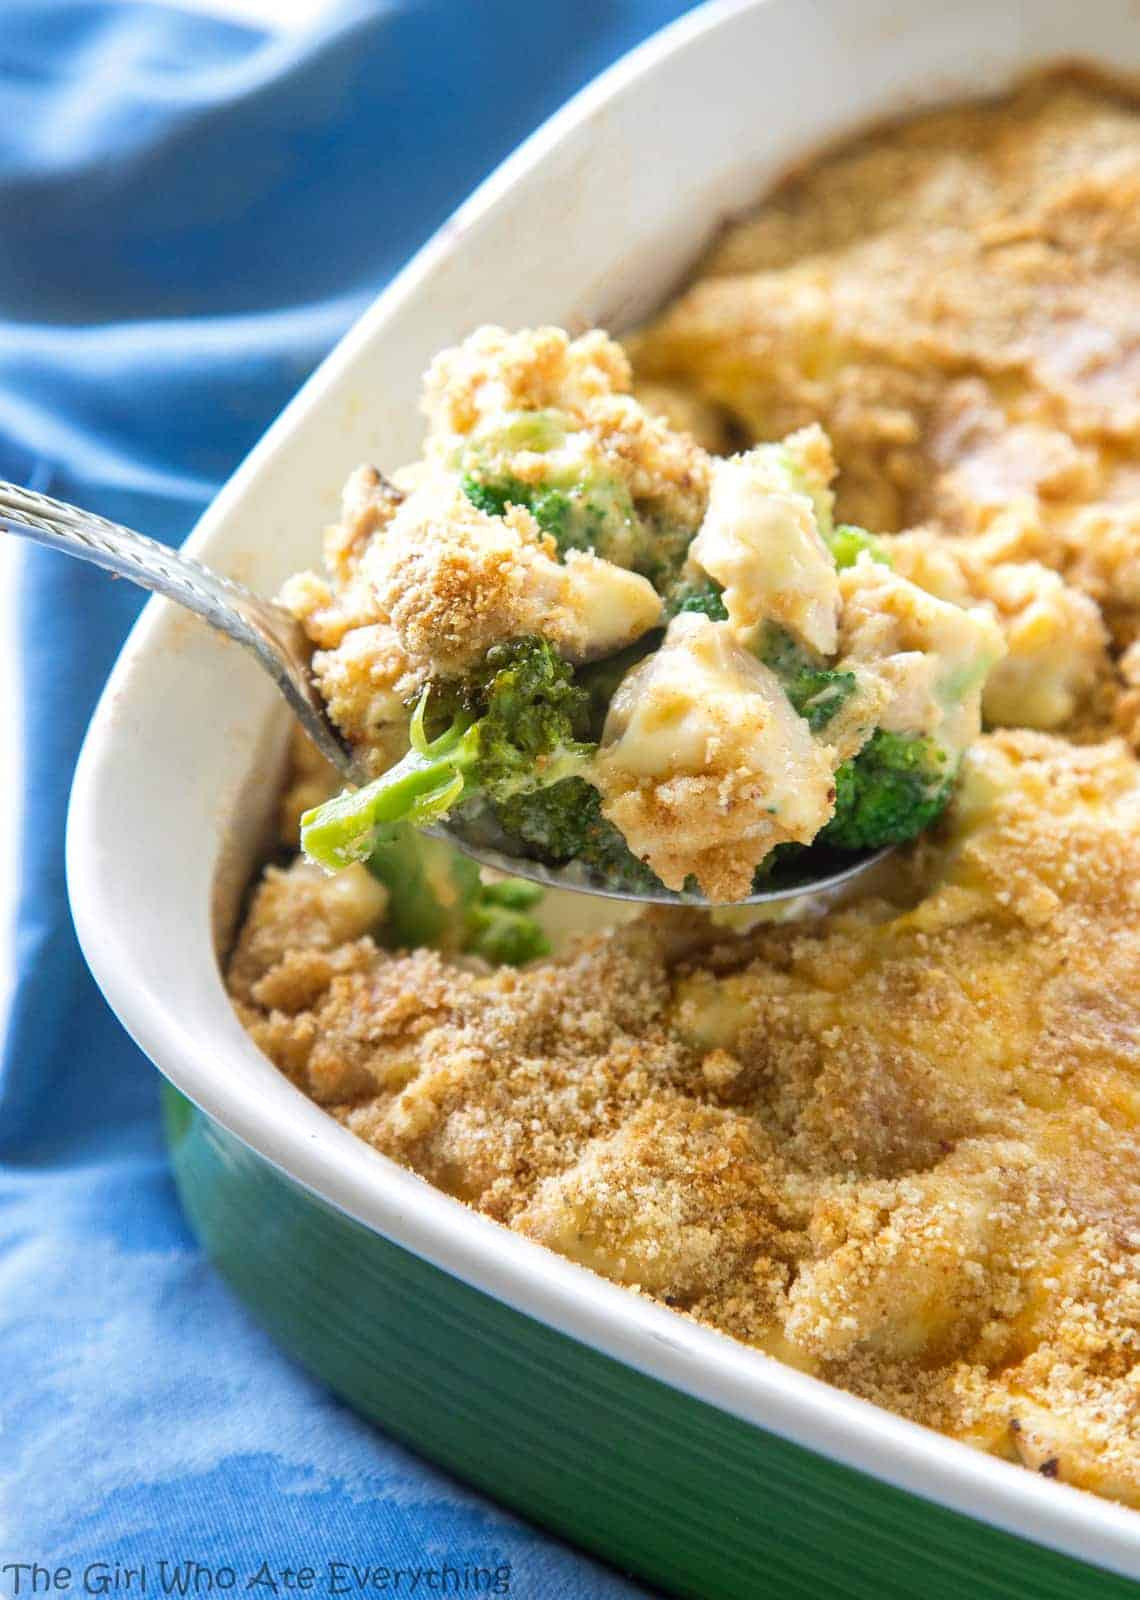 Healthy Baked Chicken And Broccoli
 Chicken and Broccoli Bake The Girl Who Ate Everything